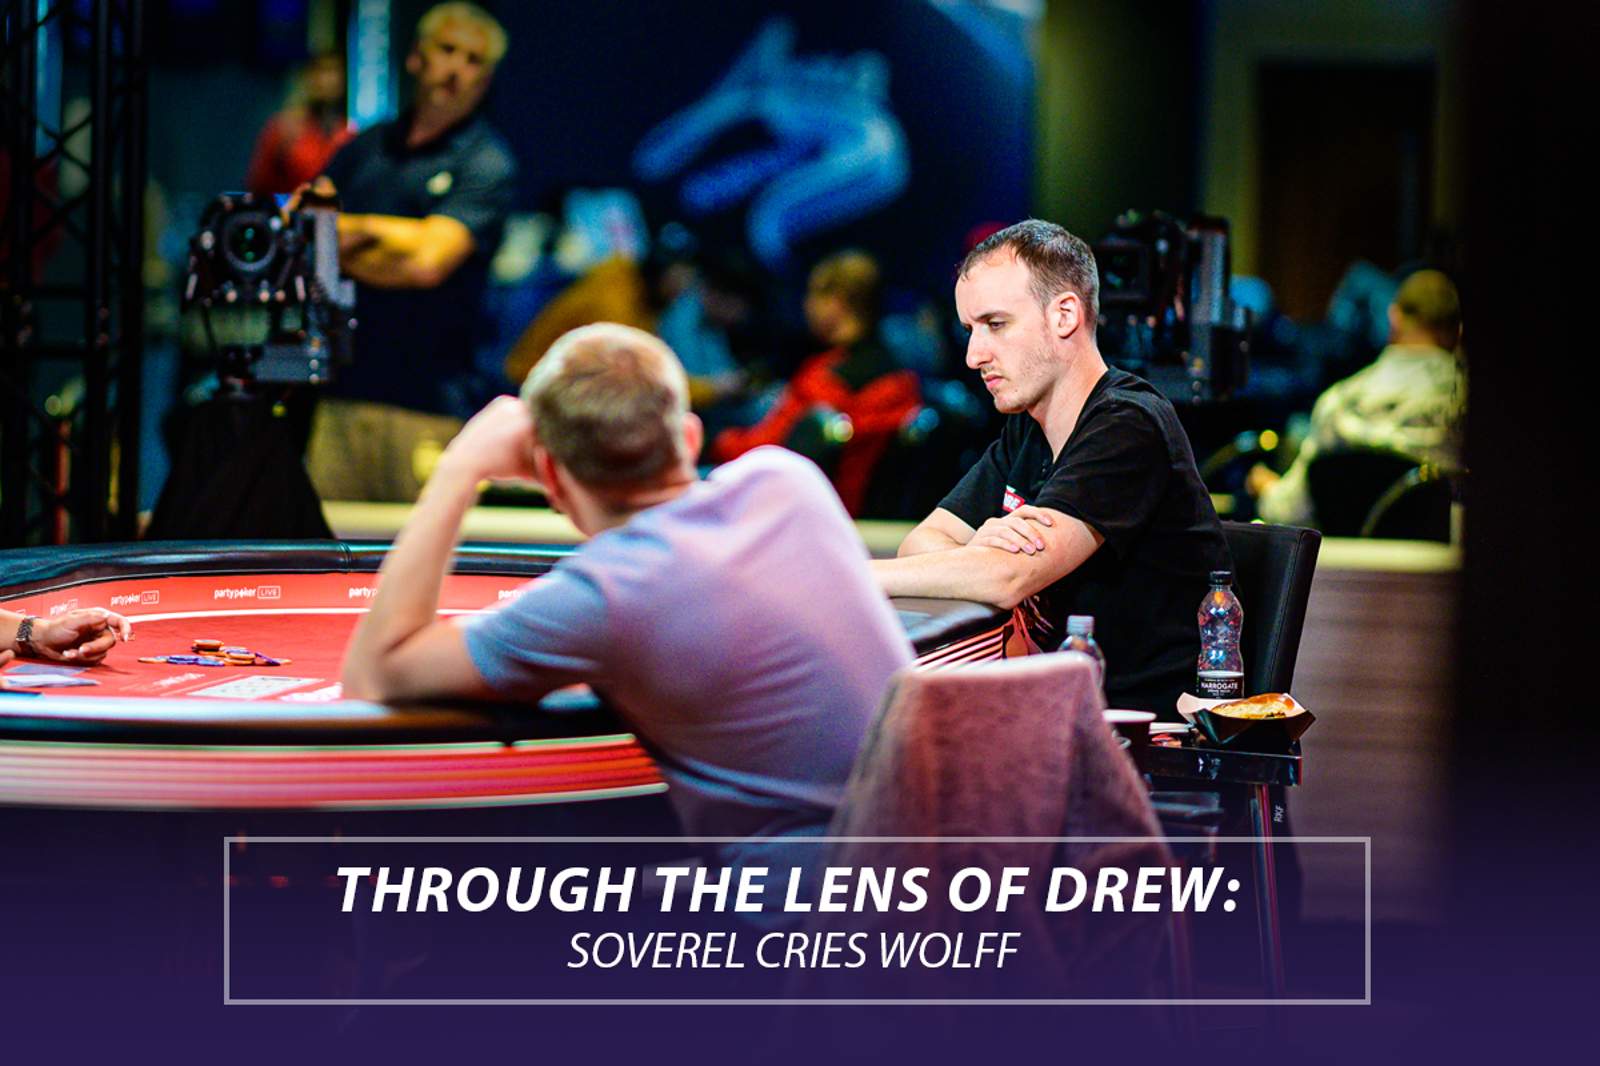 Through the Lens: Soverel Cries Wolff